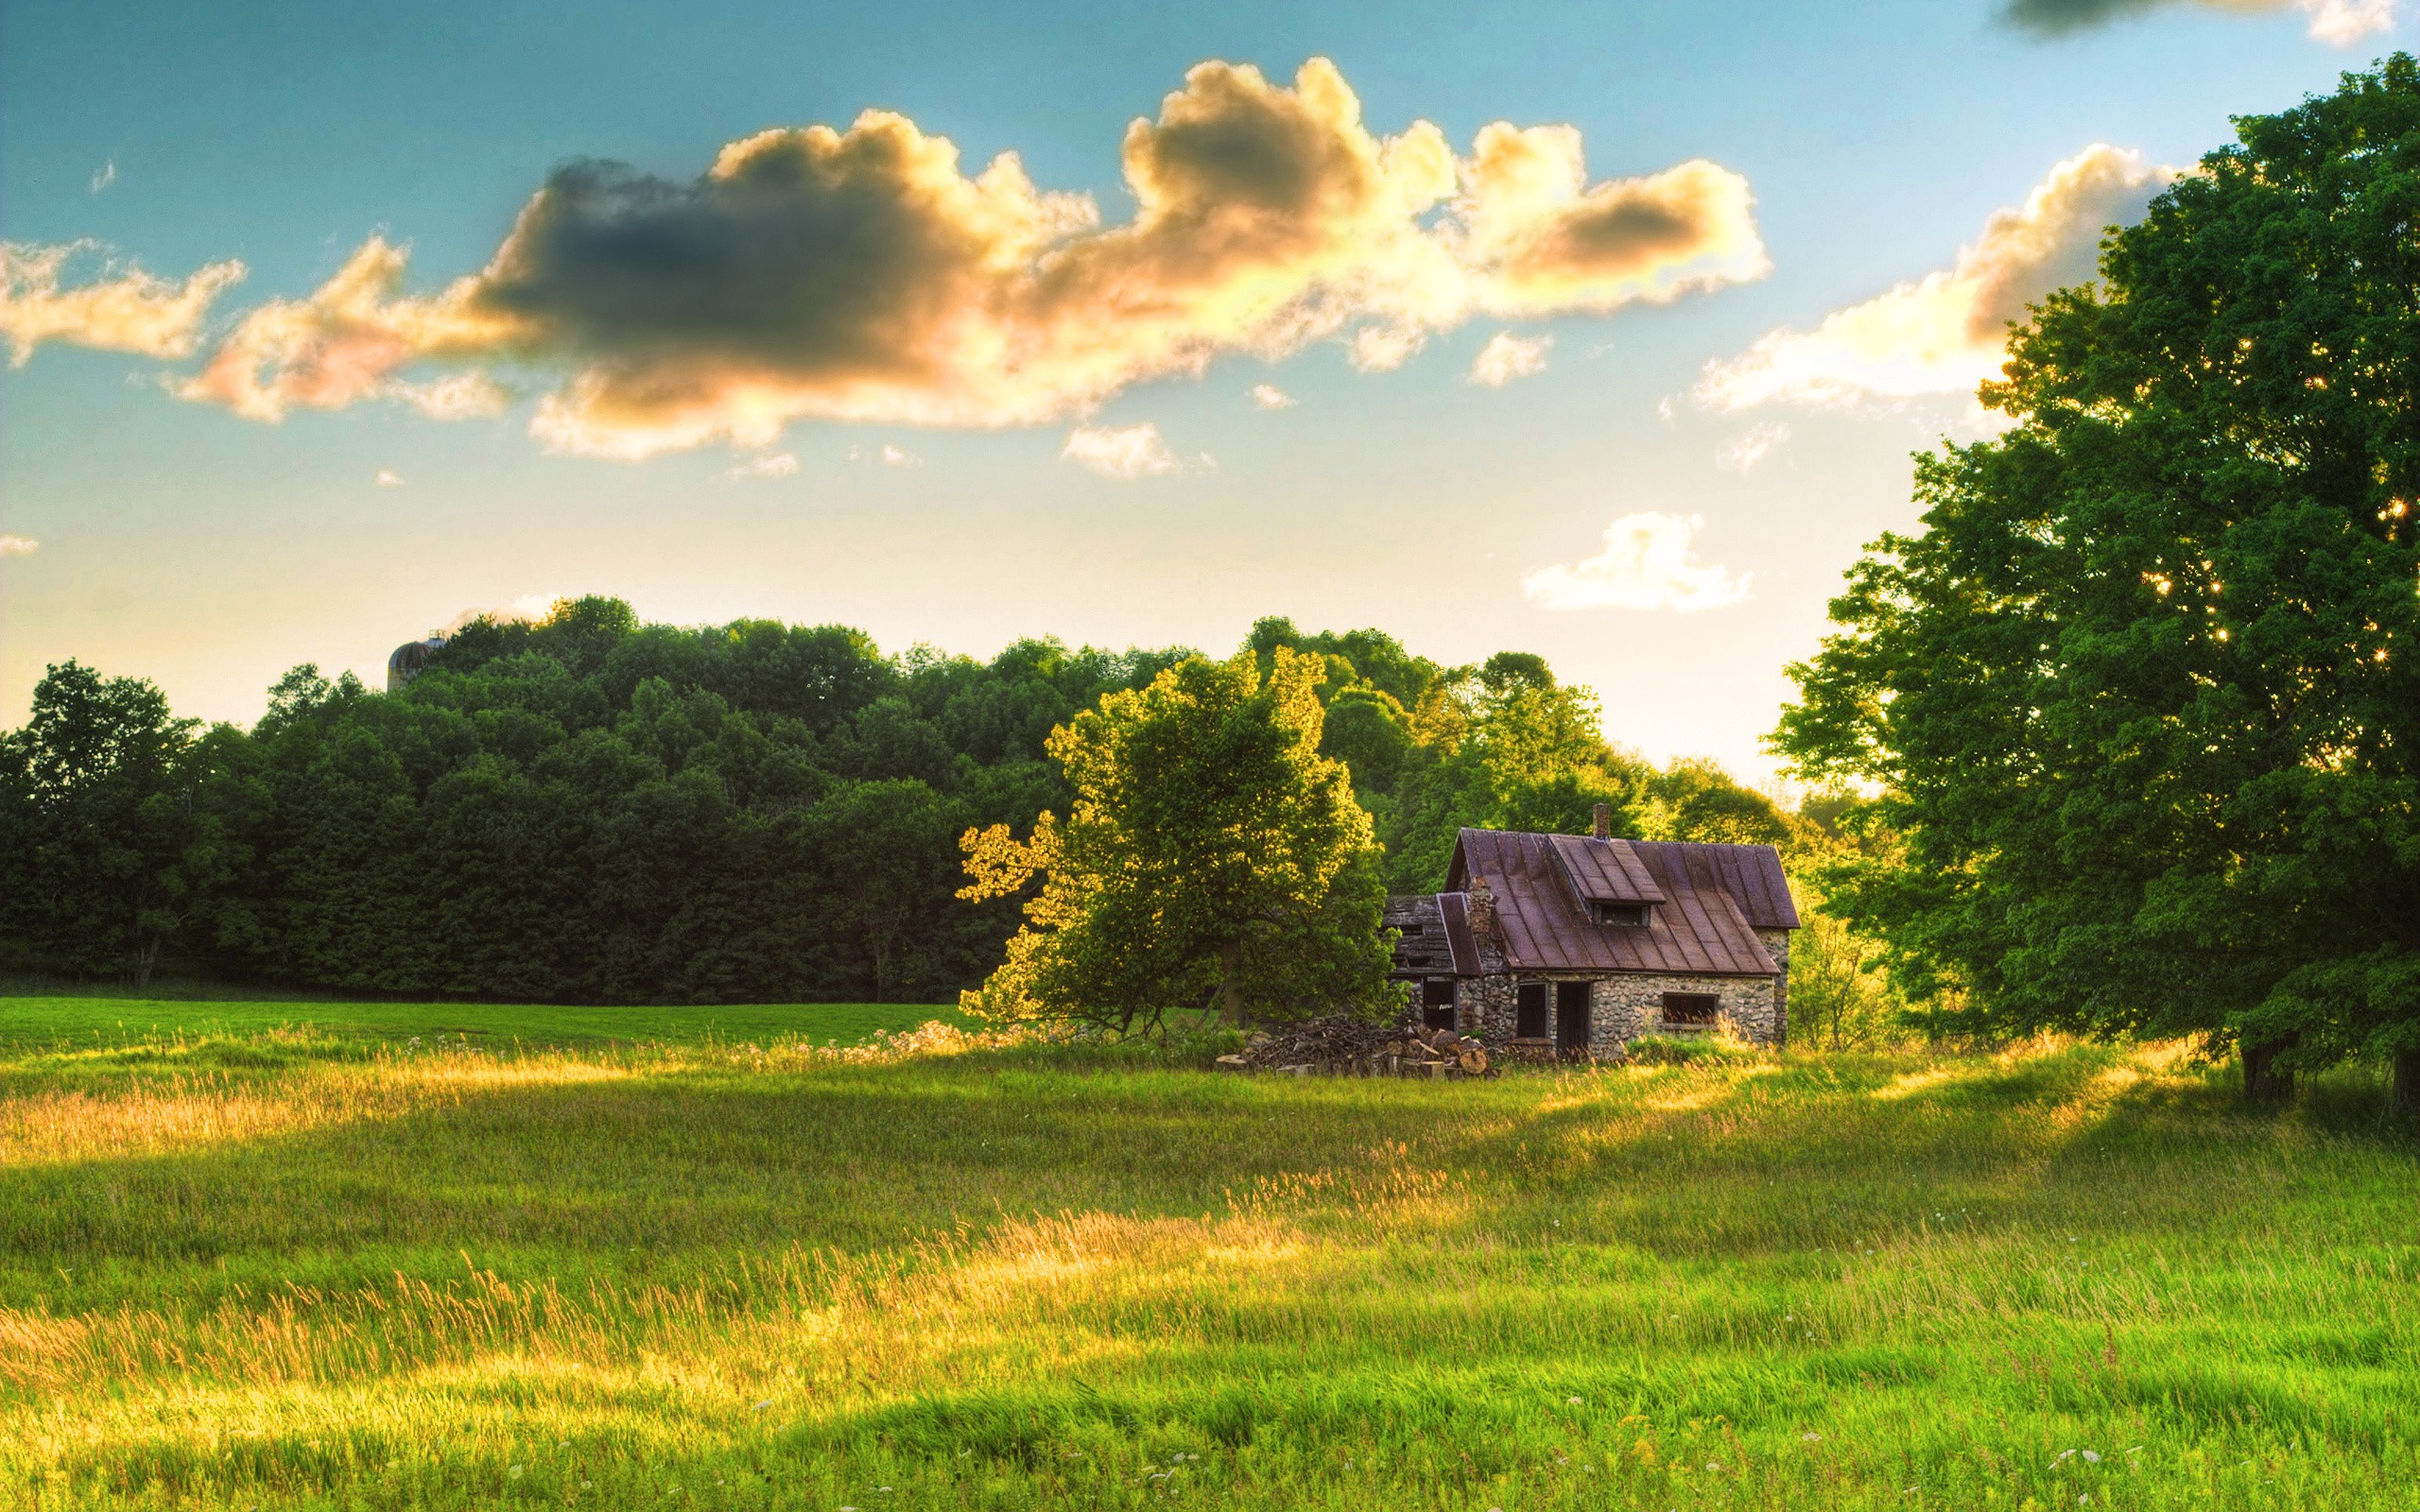 General 2560x1600 nature field grass abandoned house sunlight calm trees clouds ruins